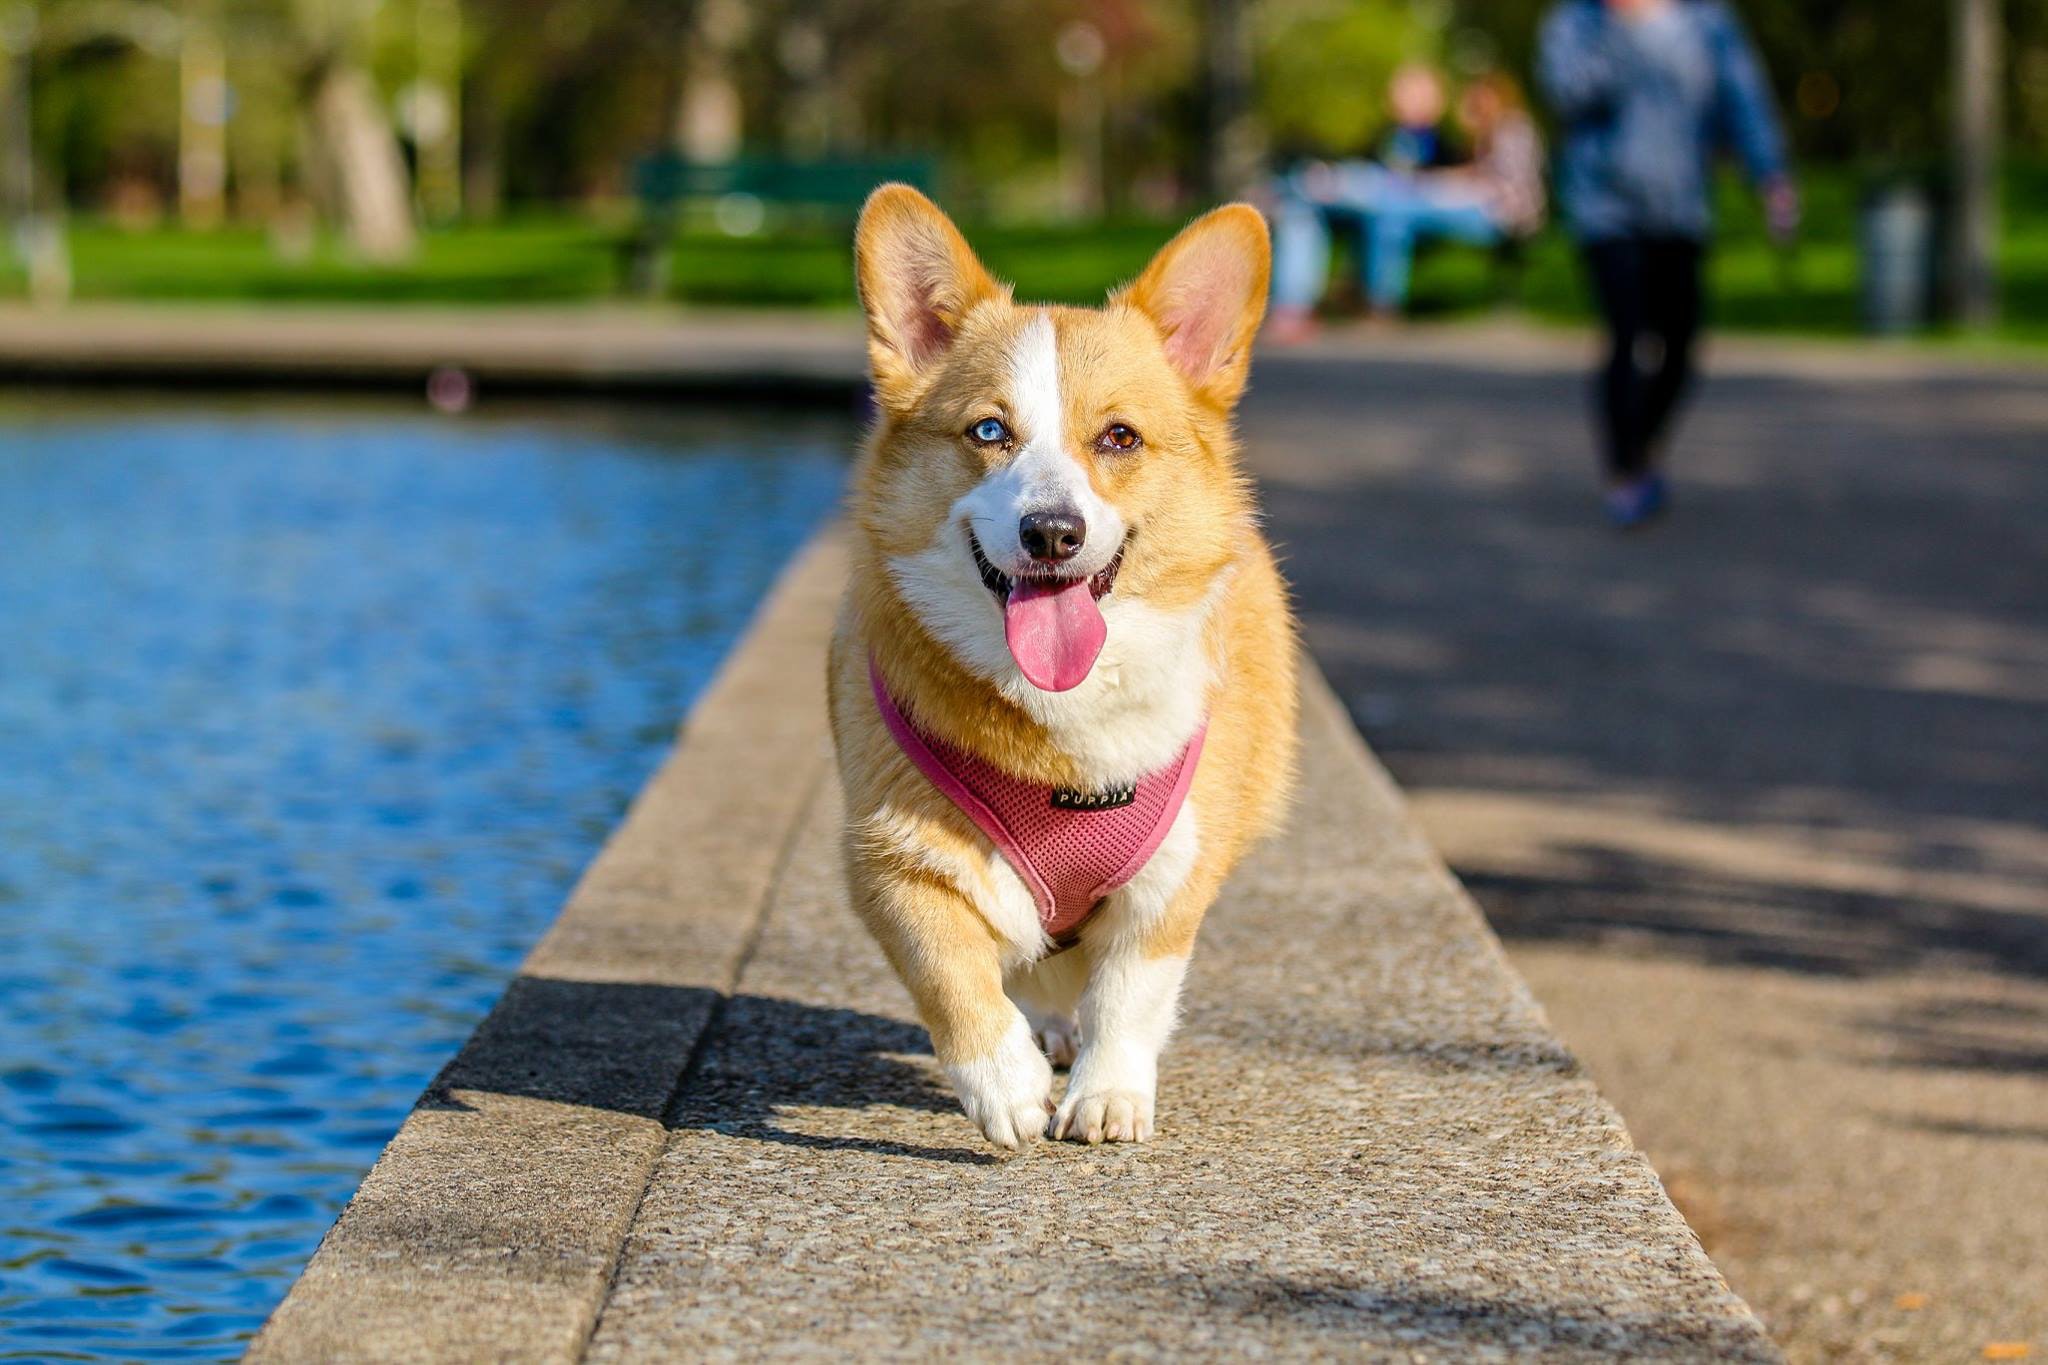 Spend a Day with Your Dog at These Local Dog Parks